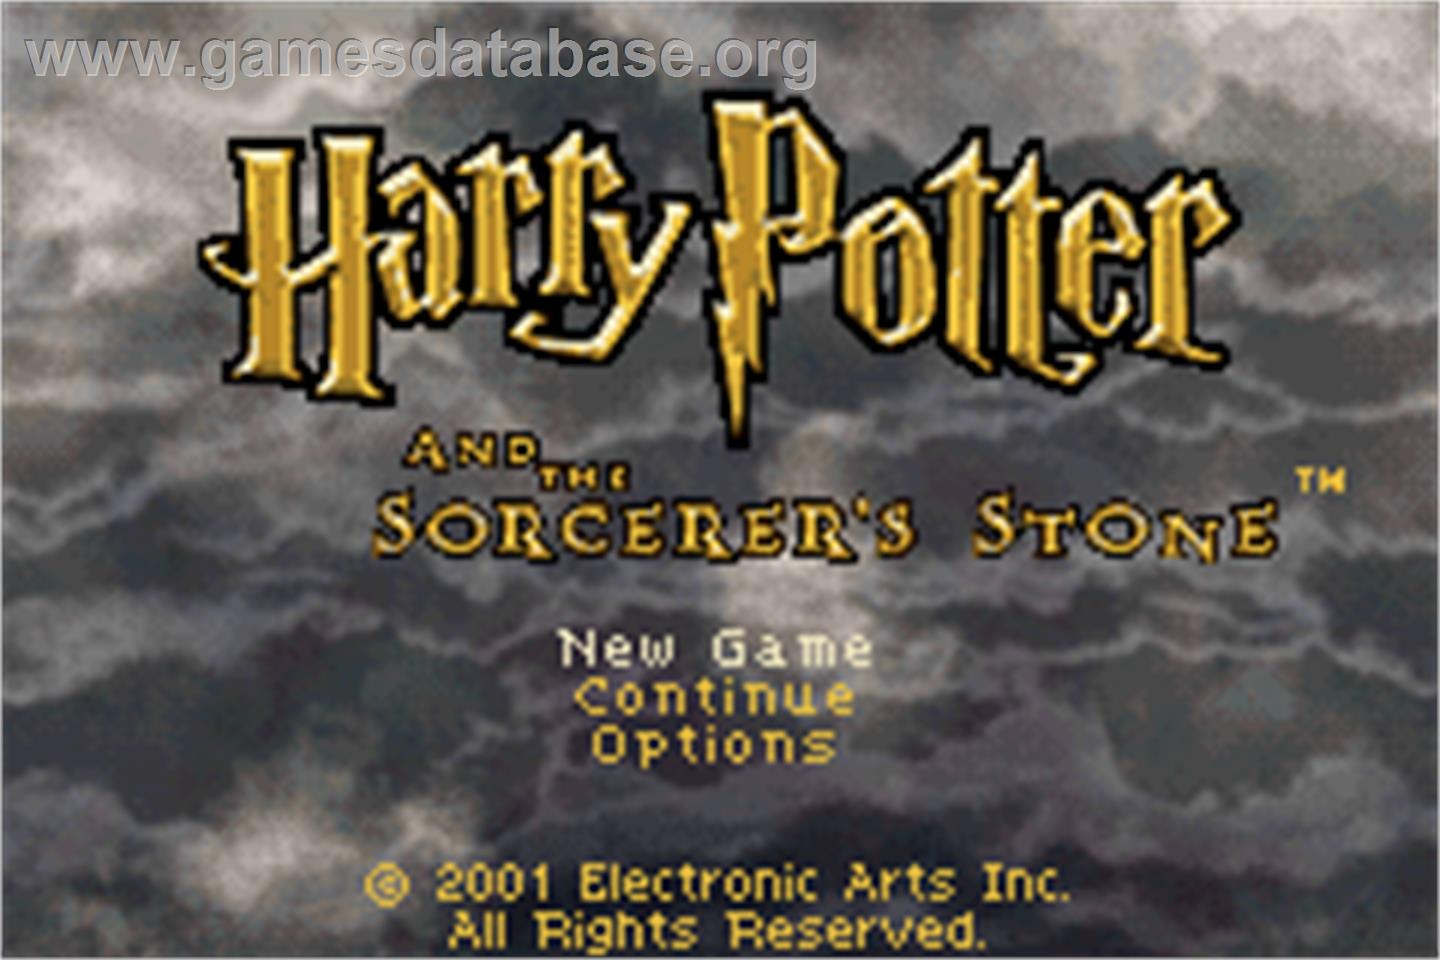 Harry Potter and the Sorcerer's Stone - Nintendo Game Boy Advance - Artwork - Title Screen